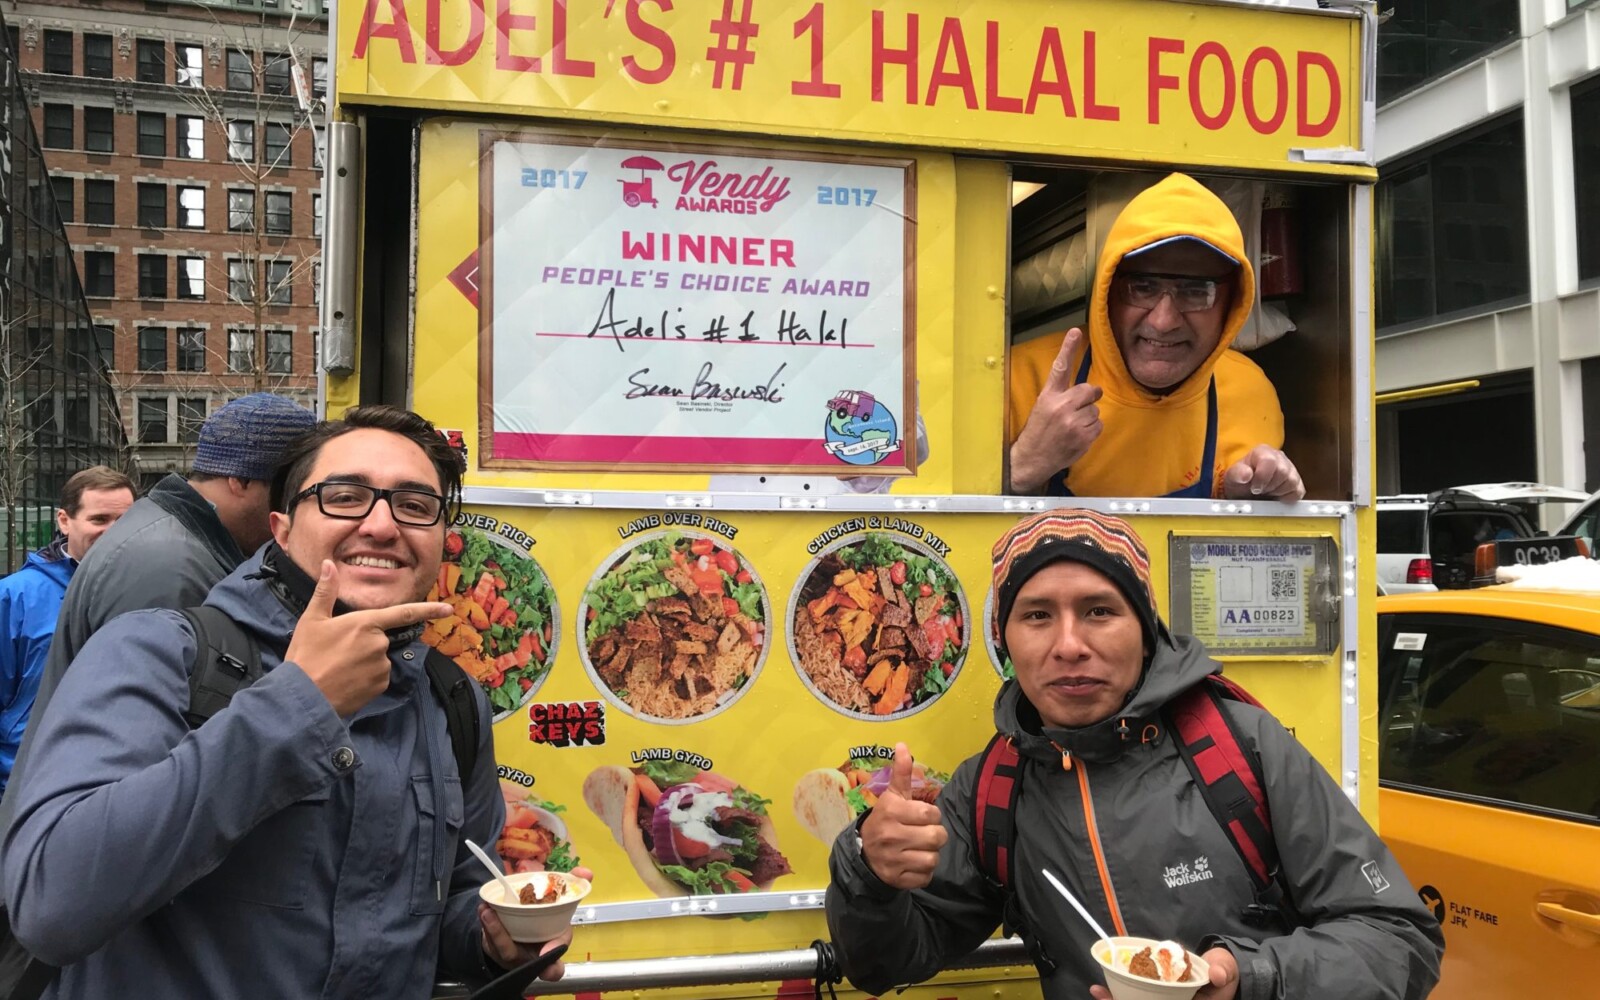 Two young men are holding bowls and posing for the camera in front of a smiling street vendor on a halal food cart